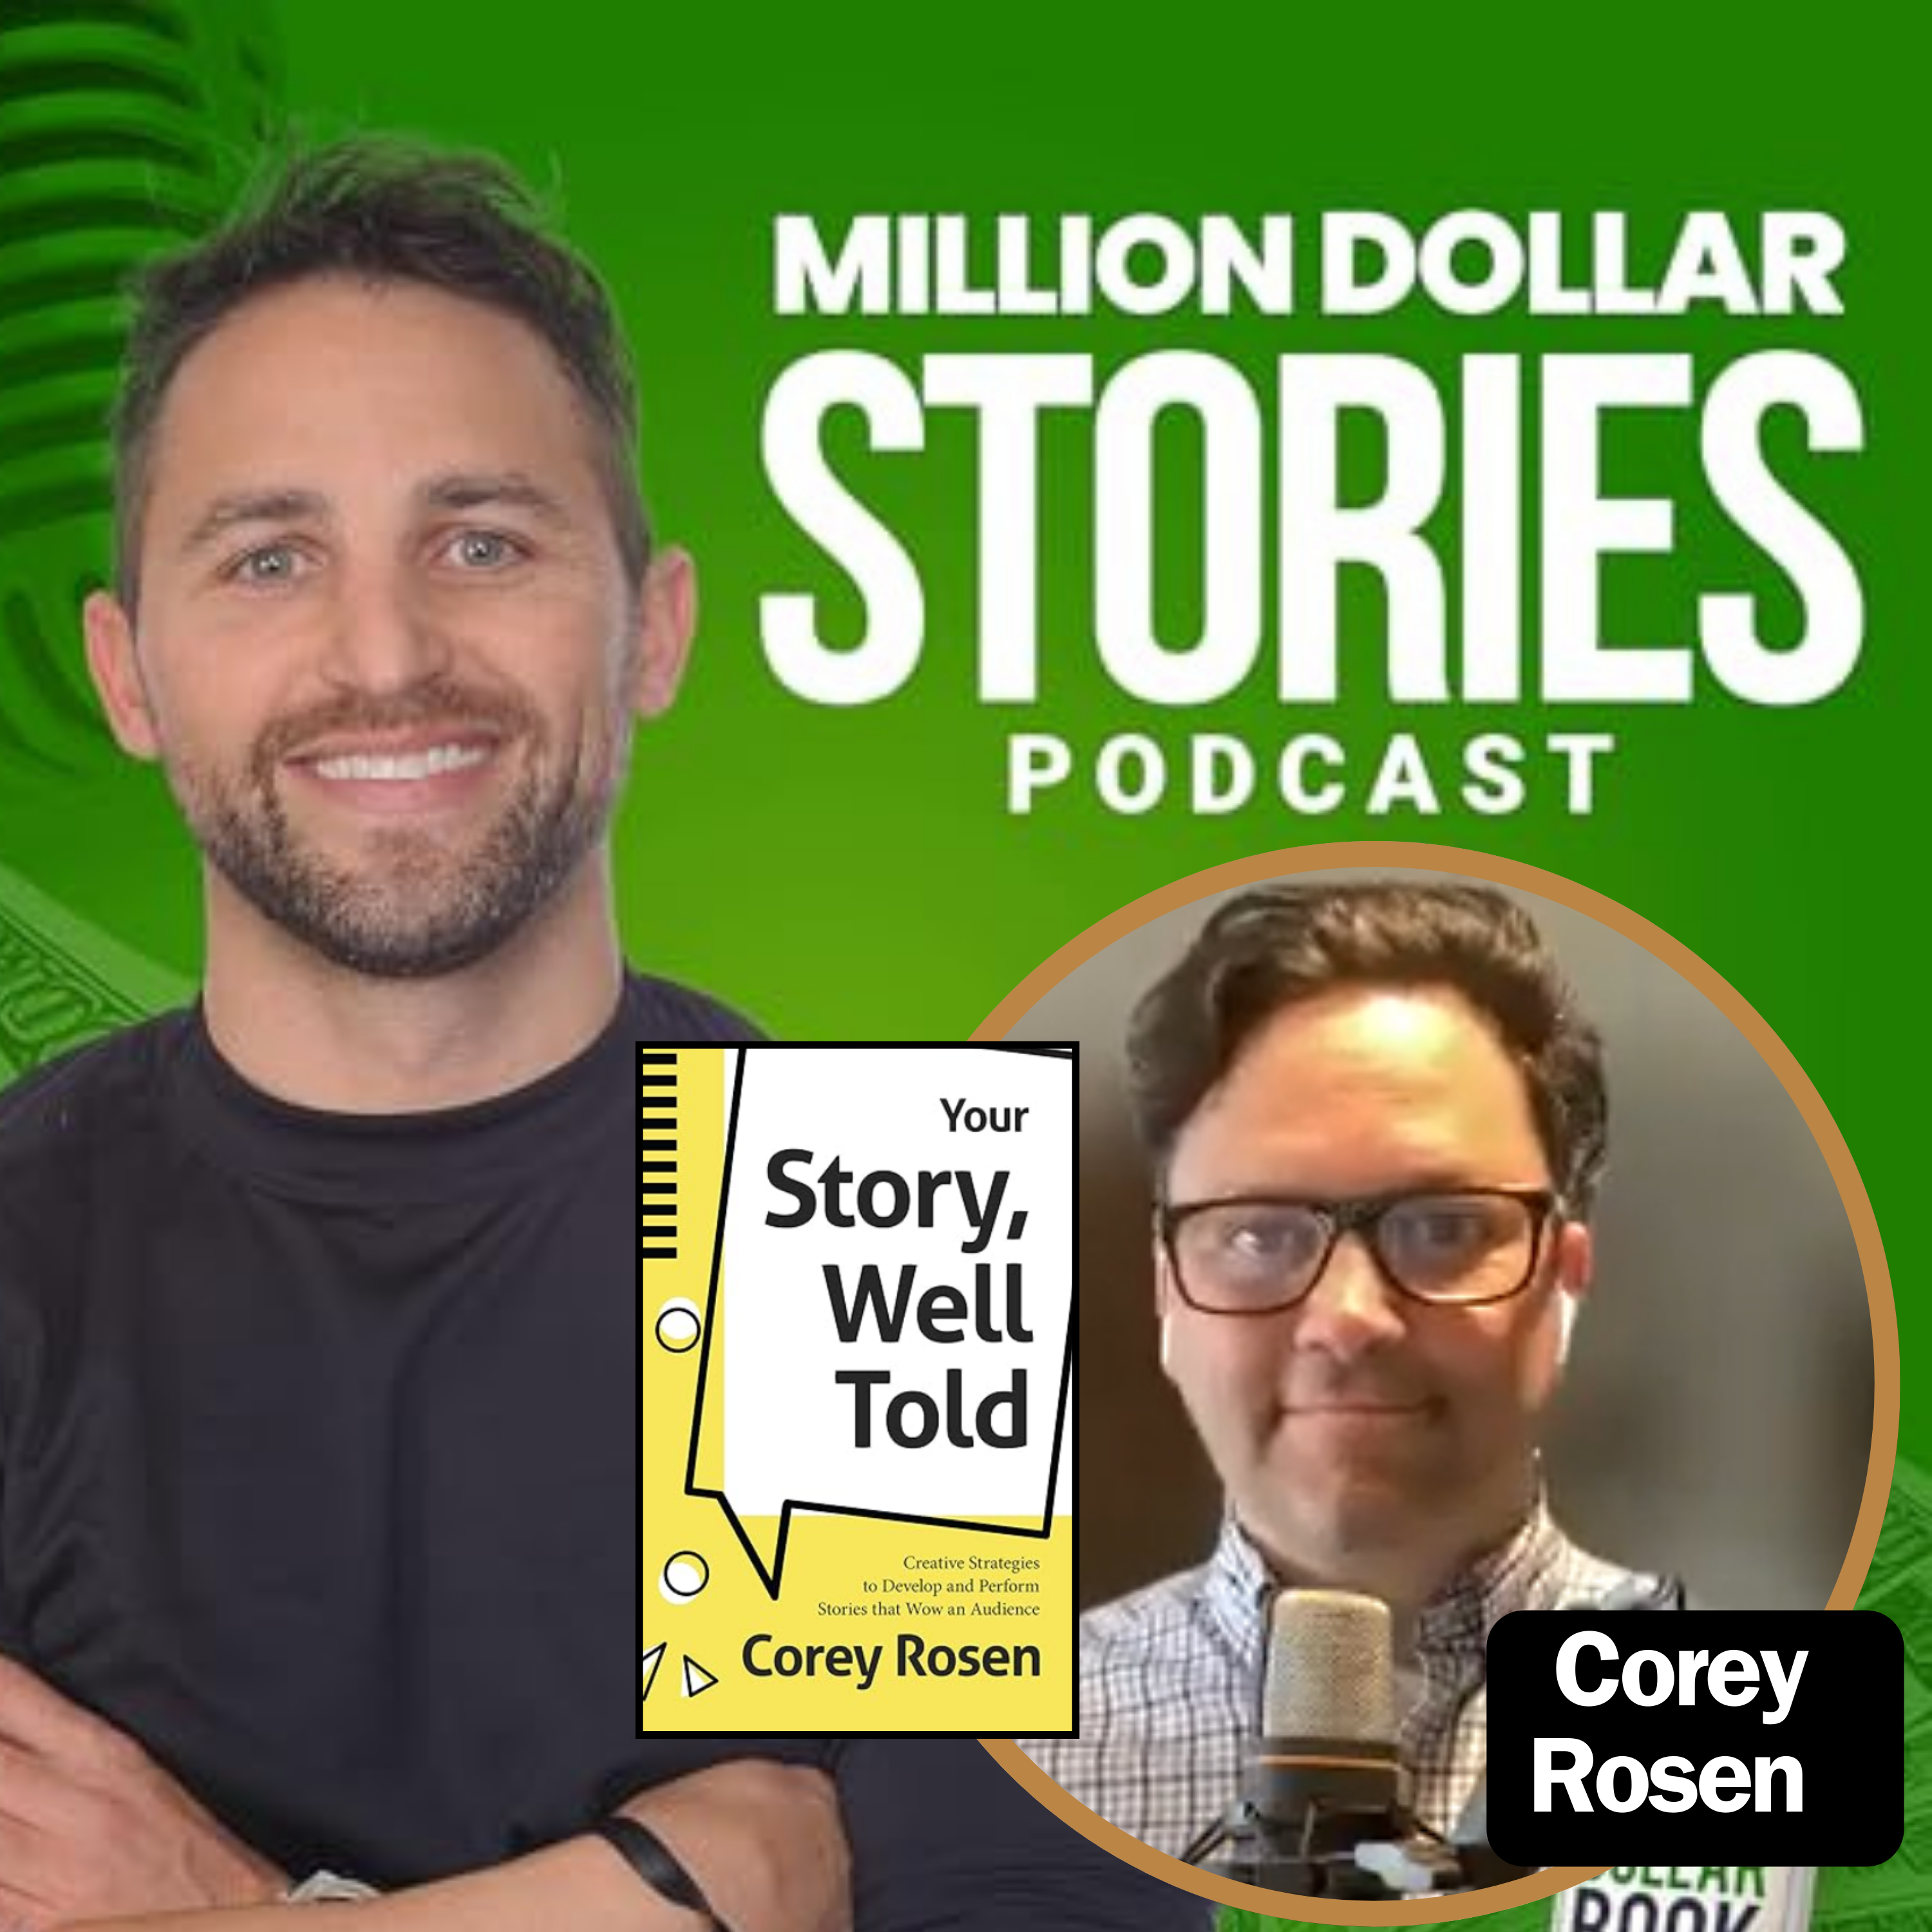 Corey Rosen – Author of “Your Story, Well Told: Creative Strategies to Develop and Perform Stories that Wow an Audience (How To Sell Yourself)”